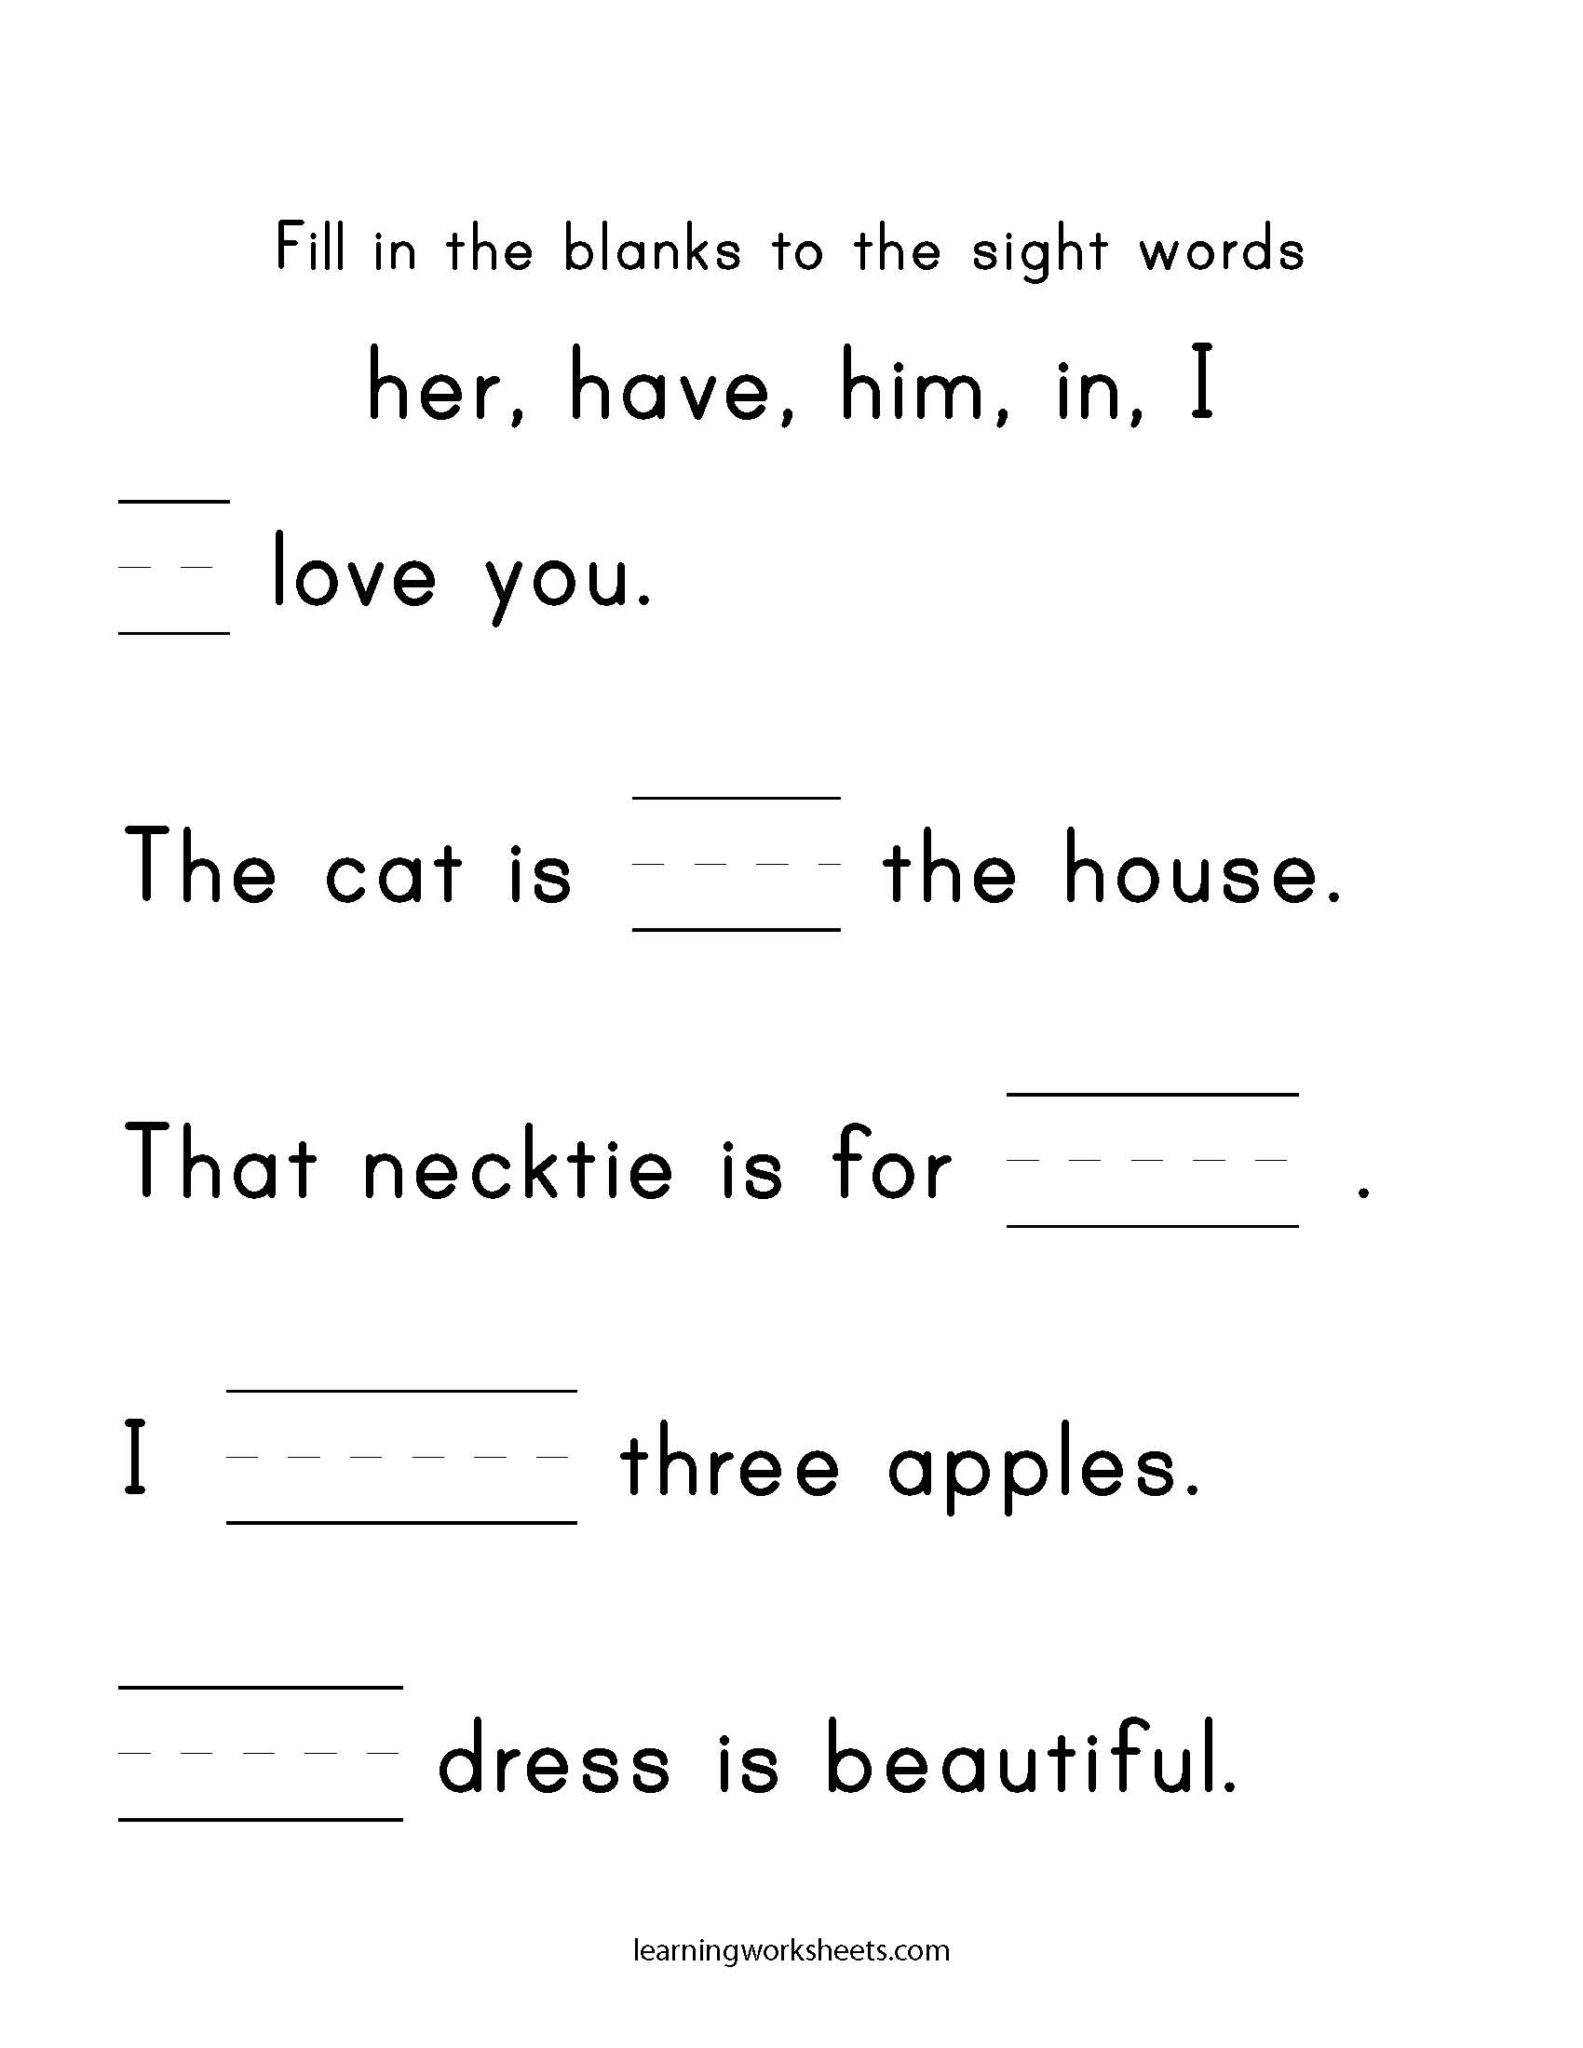 fill in the blanks to the sight words her have him in i learning